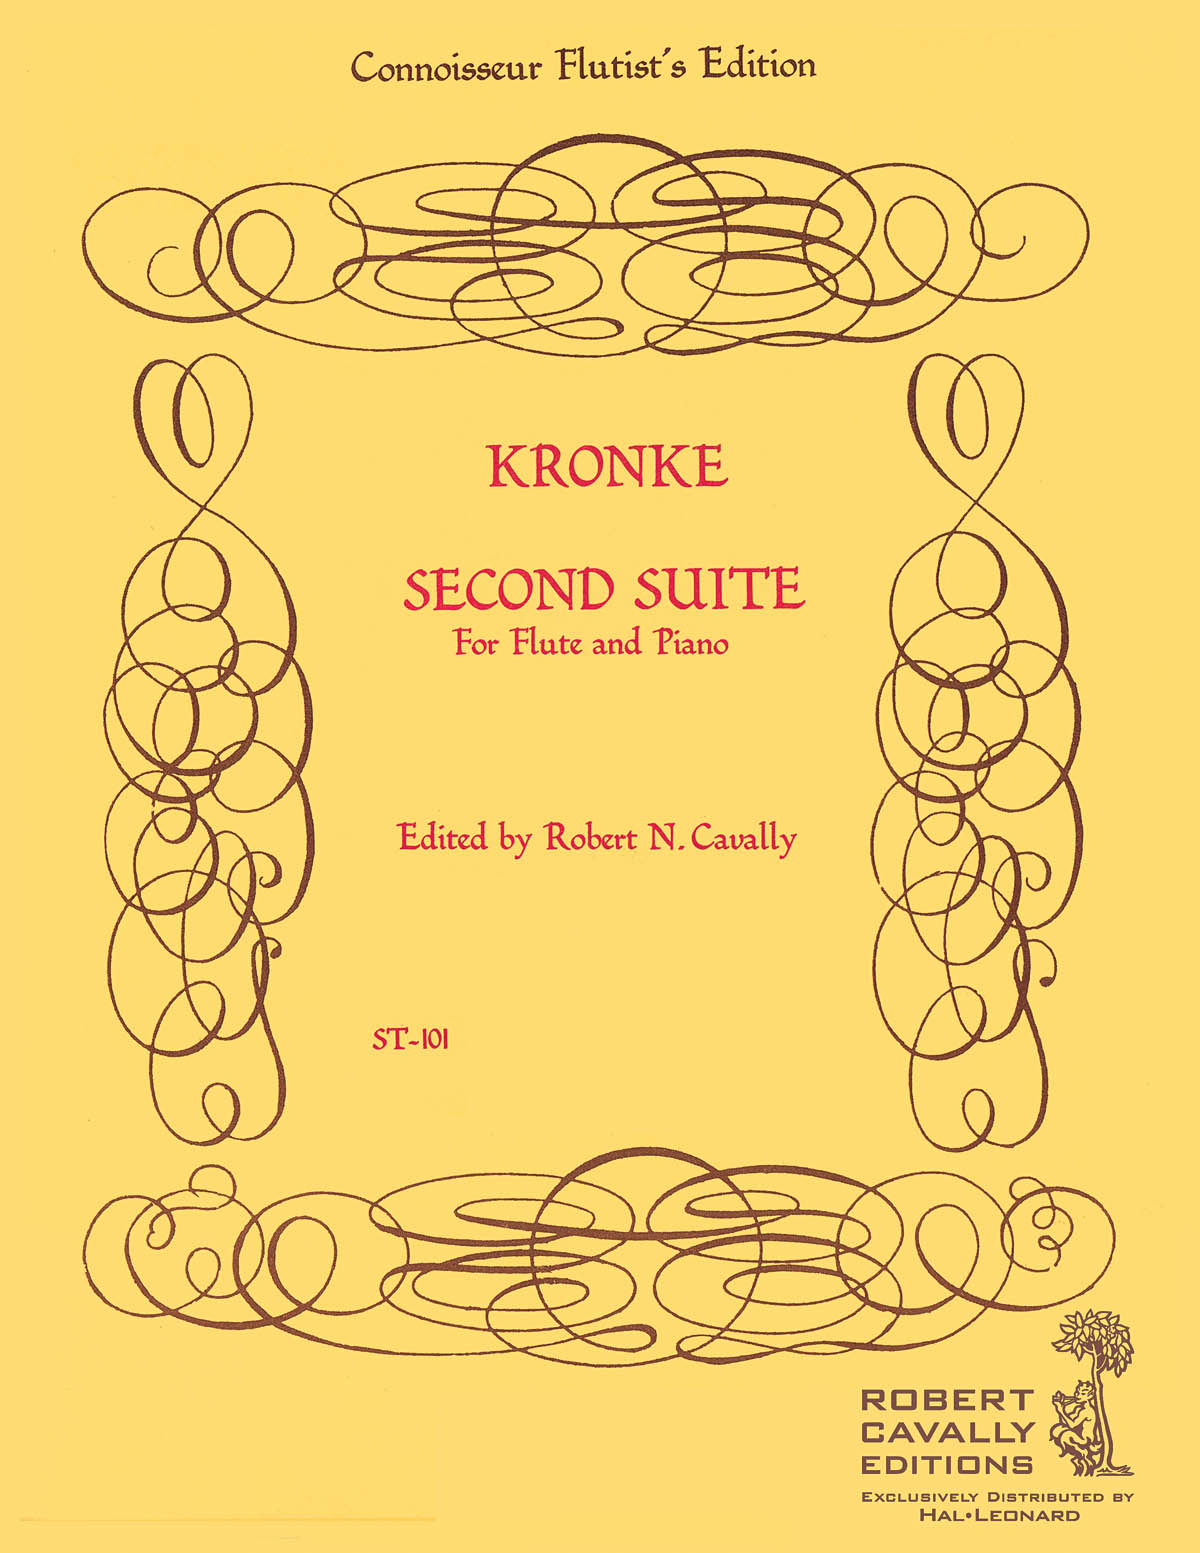 Emil Kronke: Second Suite for Flute and Piano